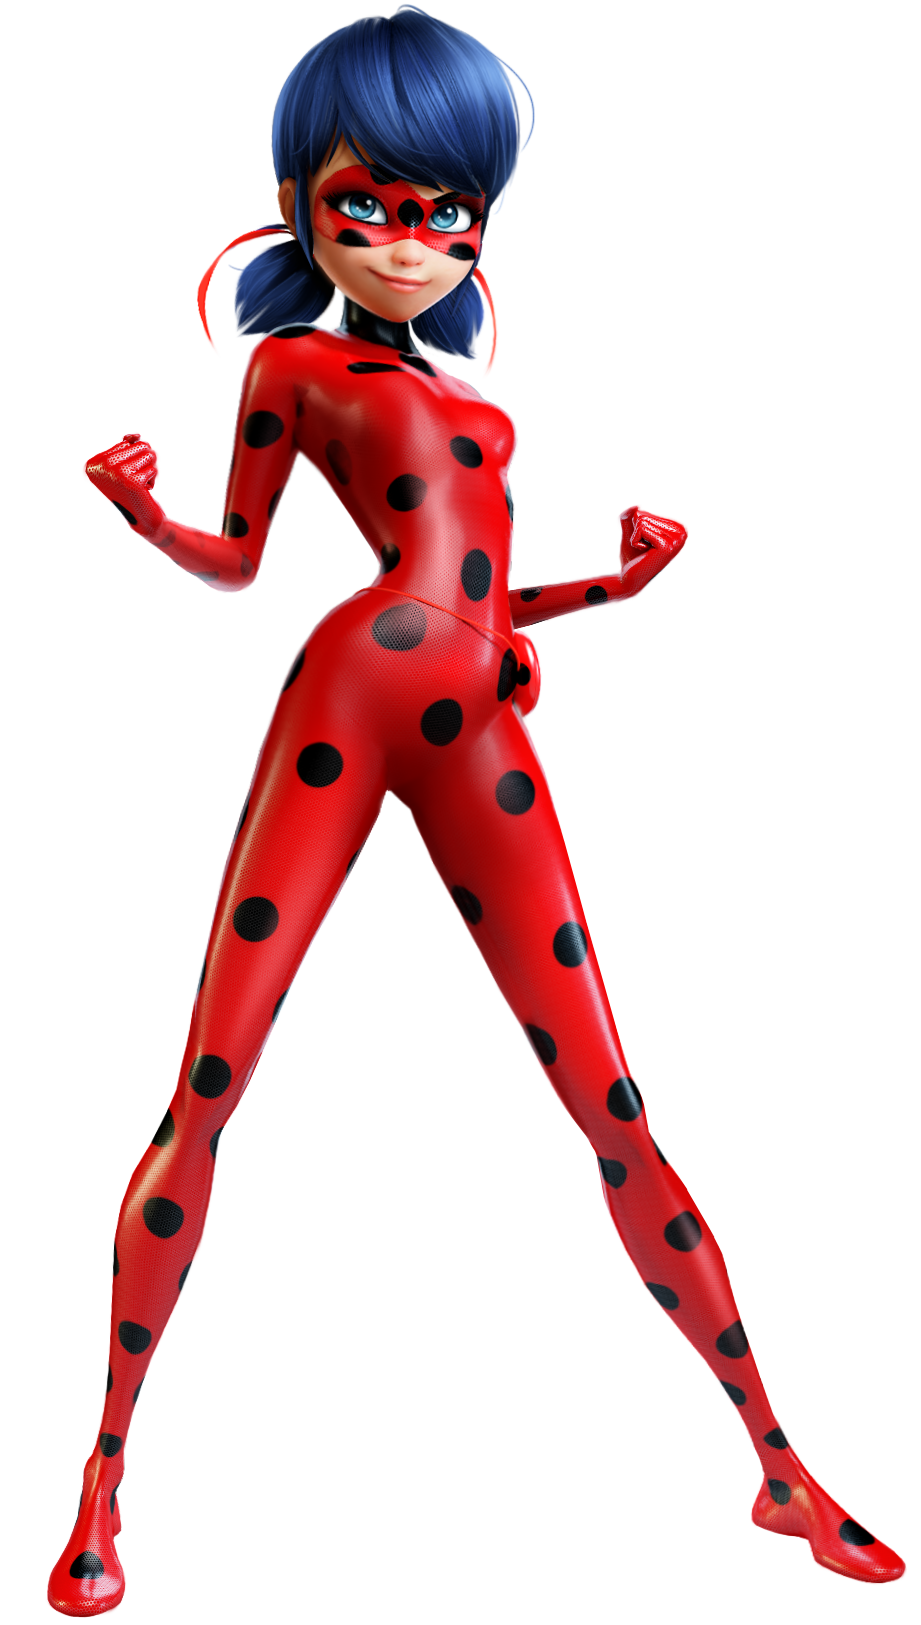 Miraculous Ladybug PNG, Vector, PSD, and Clipart With Transparent